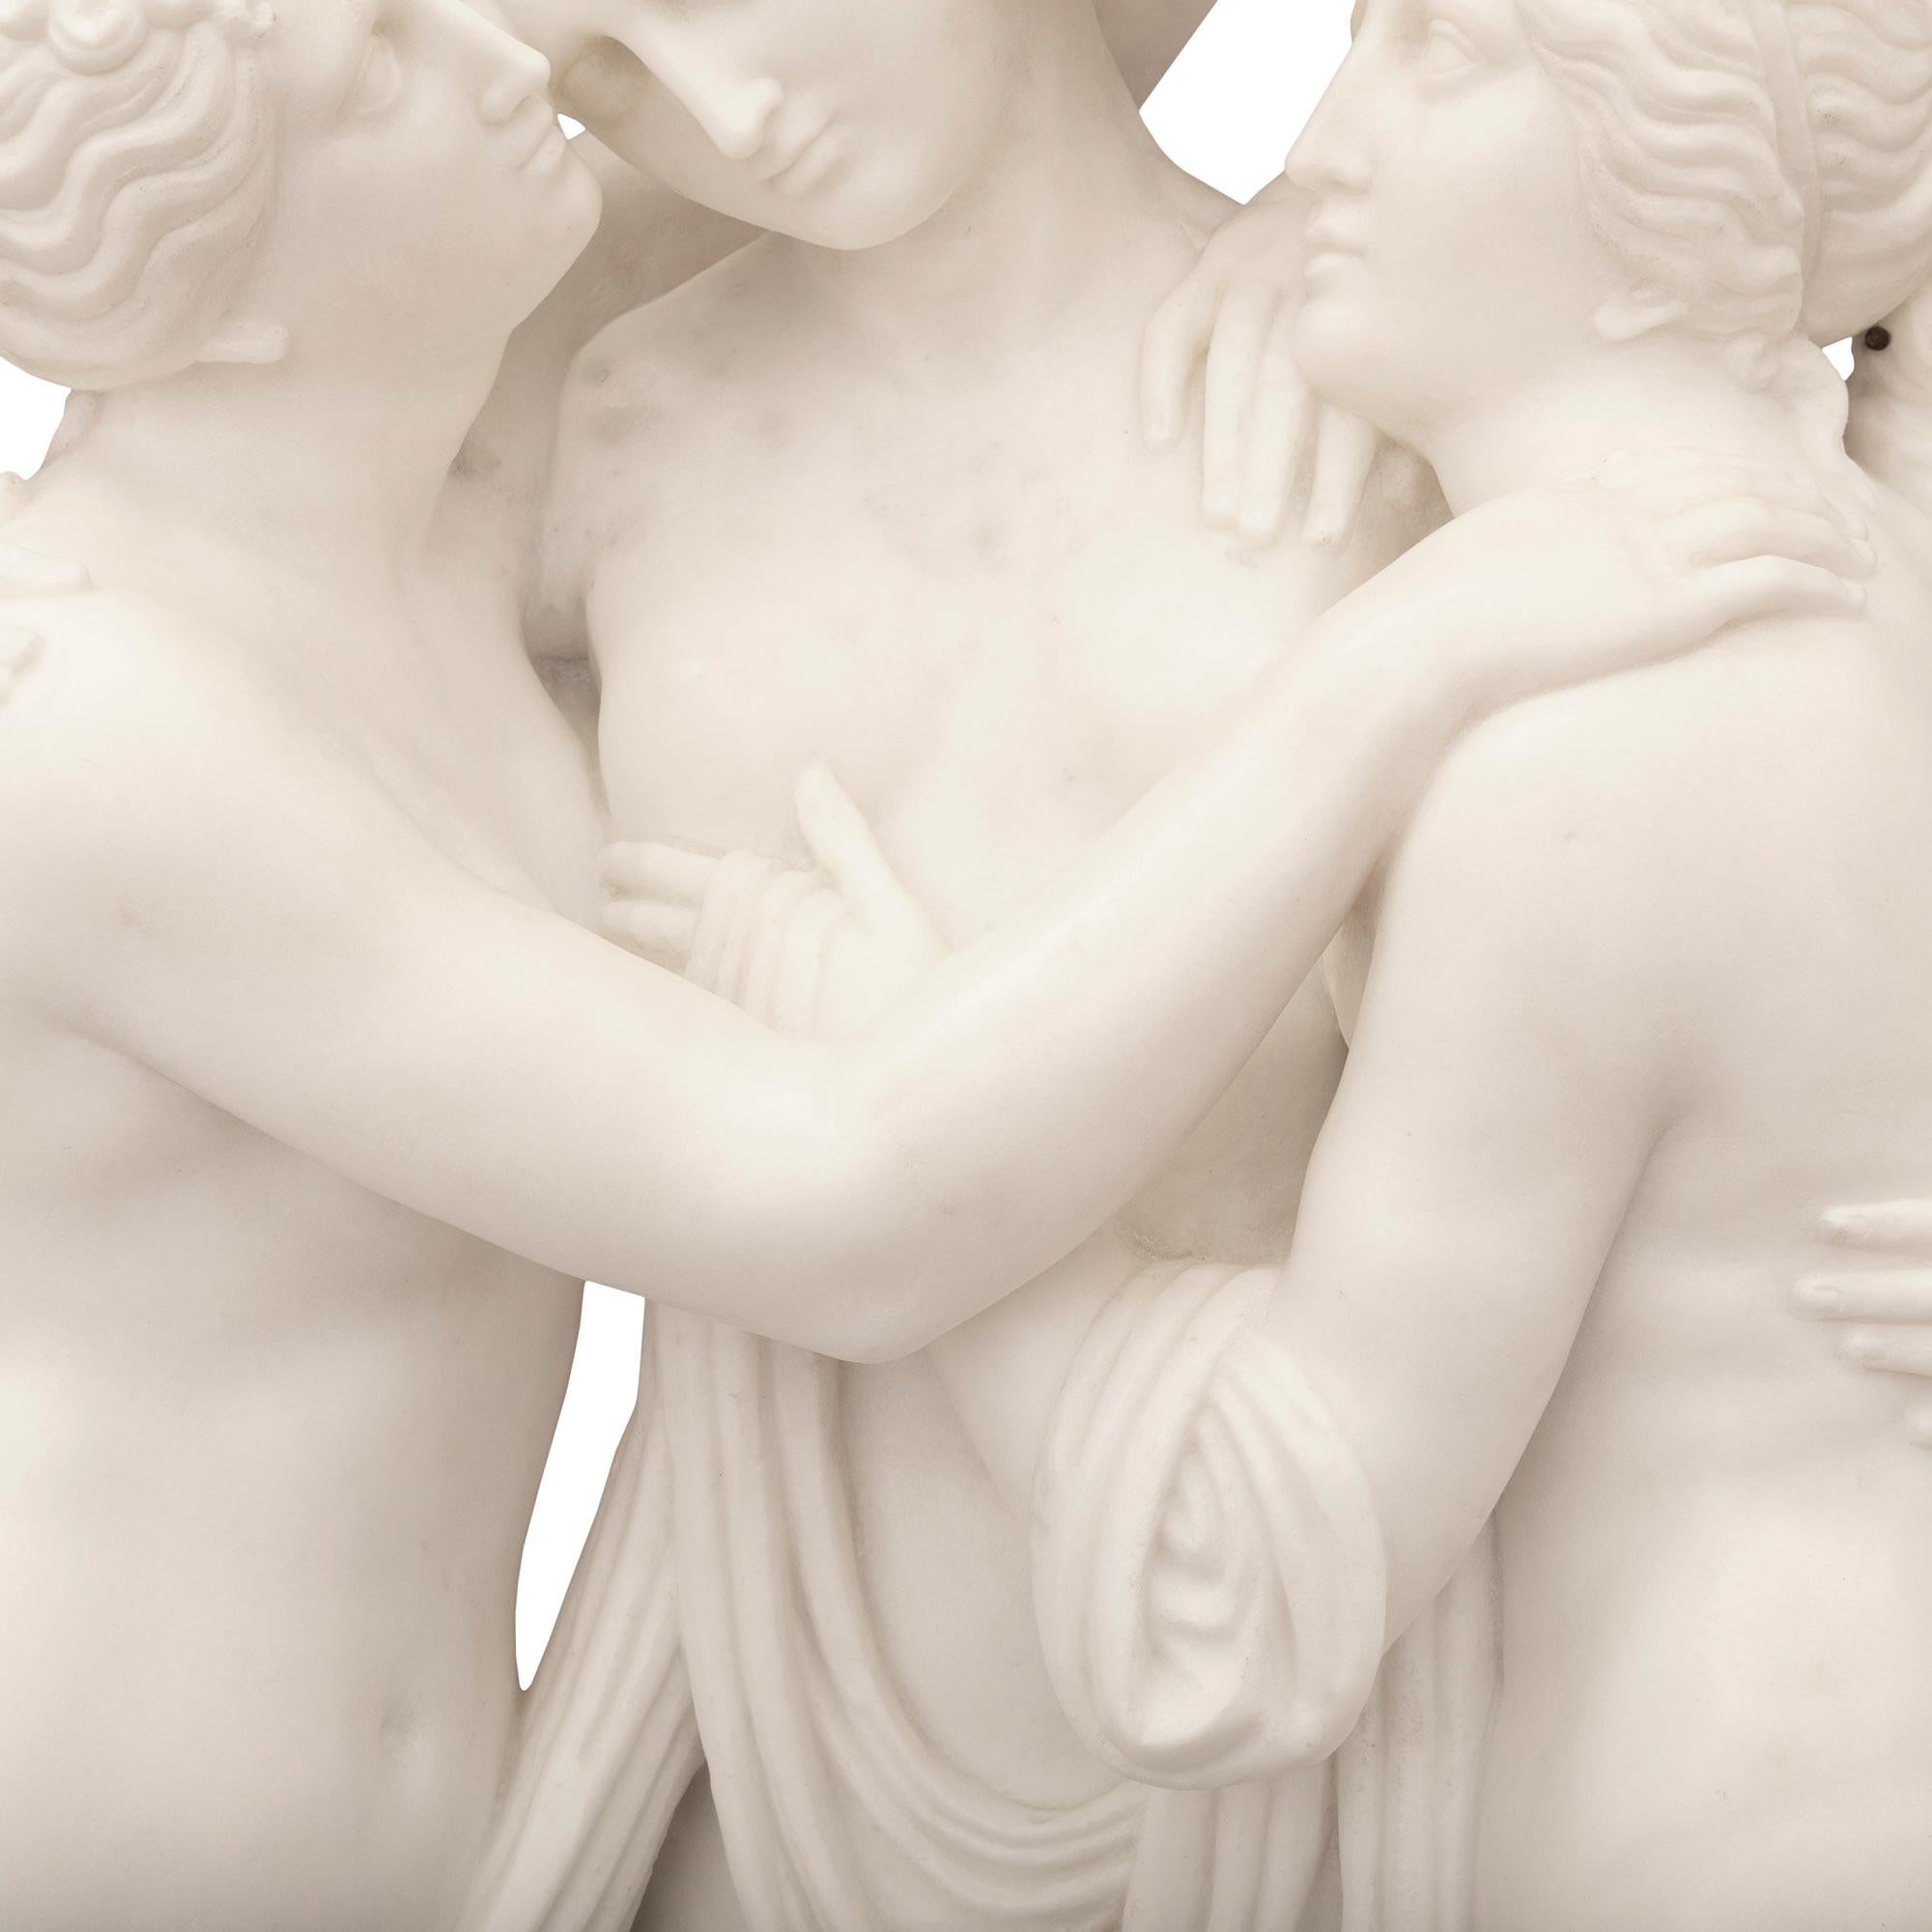 Italian 19th Century Marble Statue of the Three Graces For Sale 1